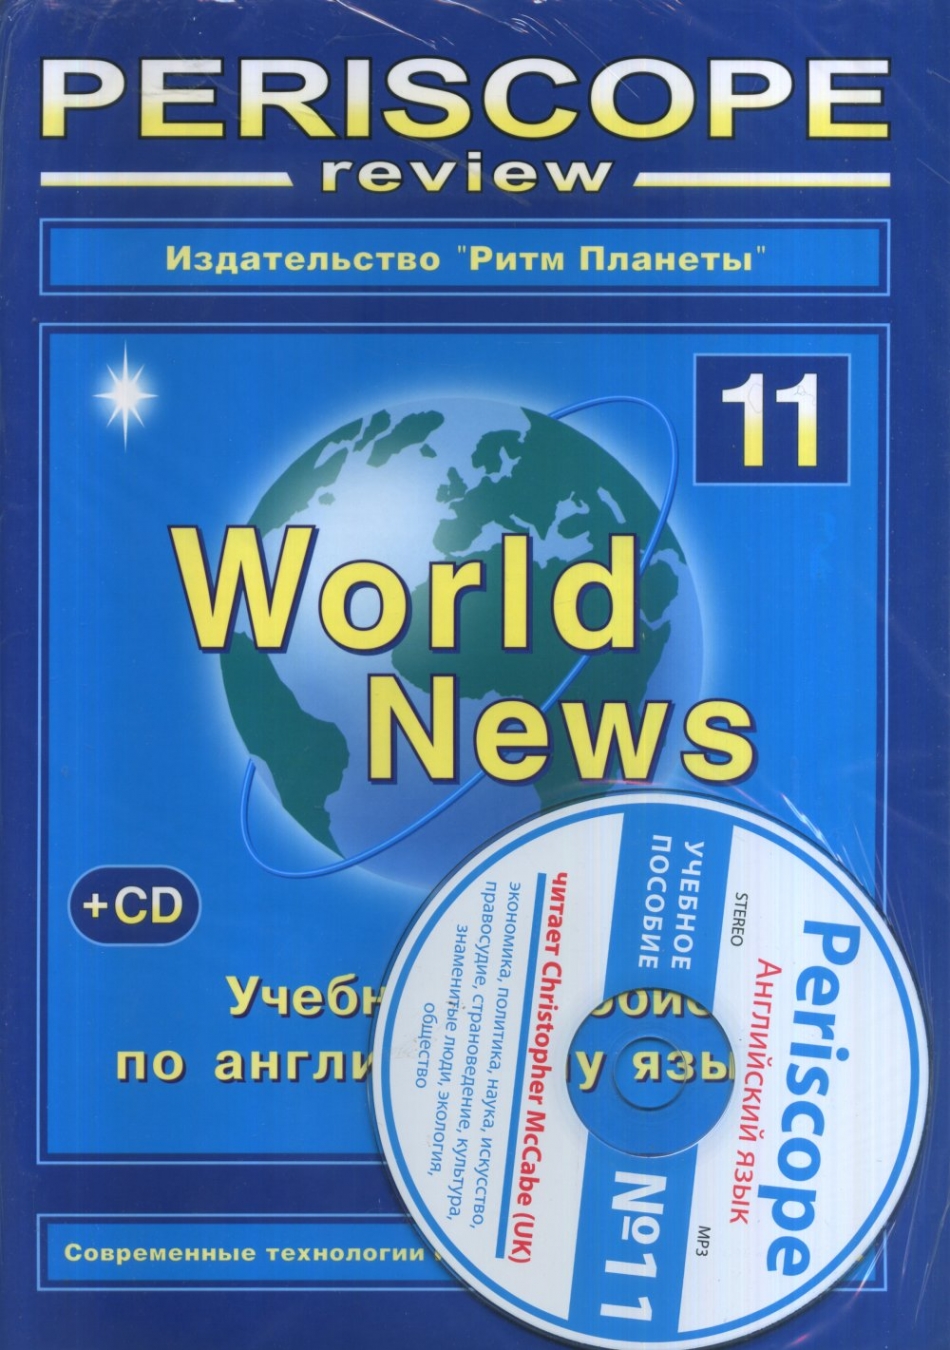  .. Periscope review.      World News  11 ( CD ).  